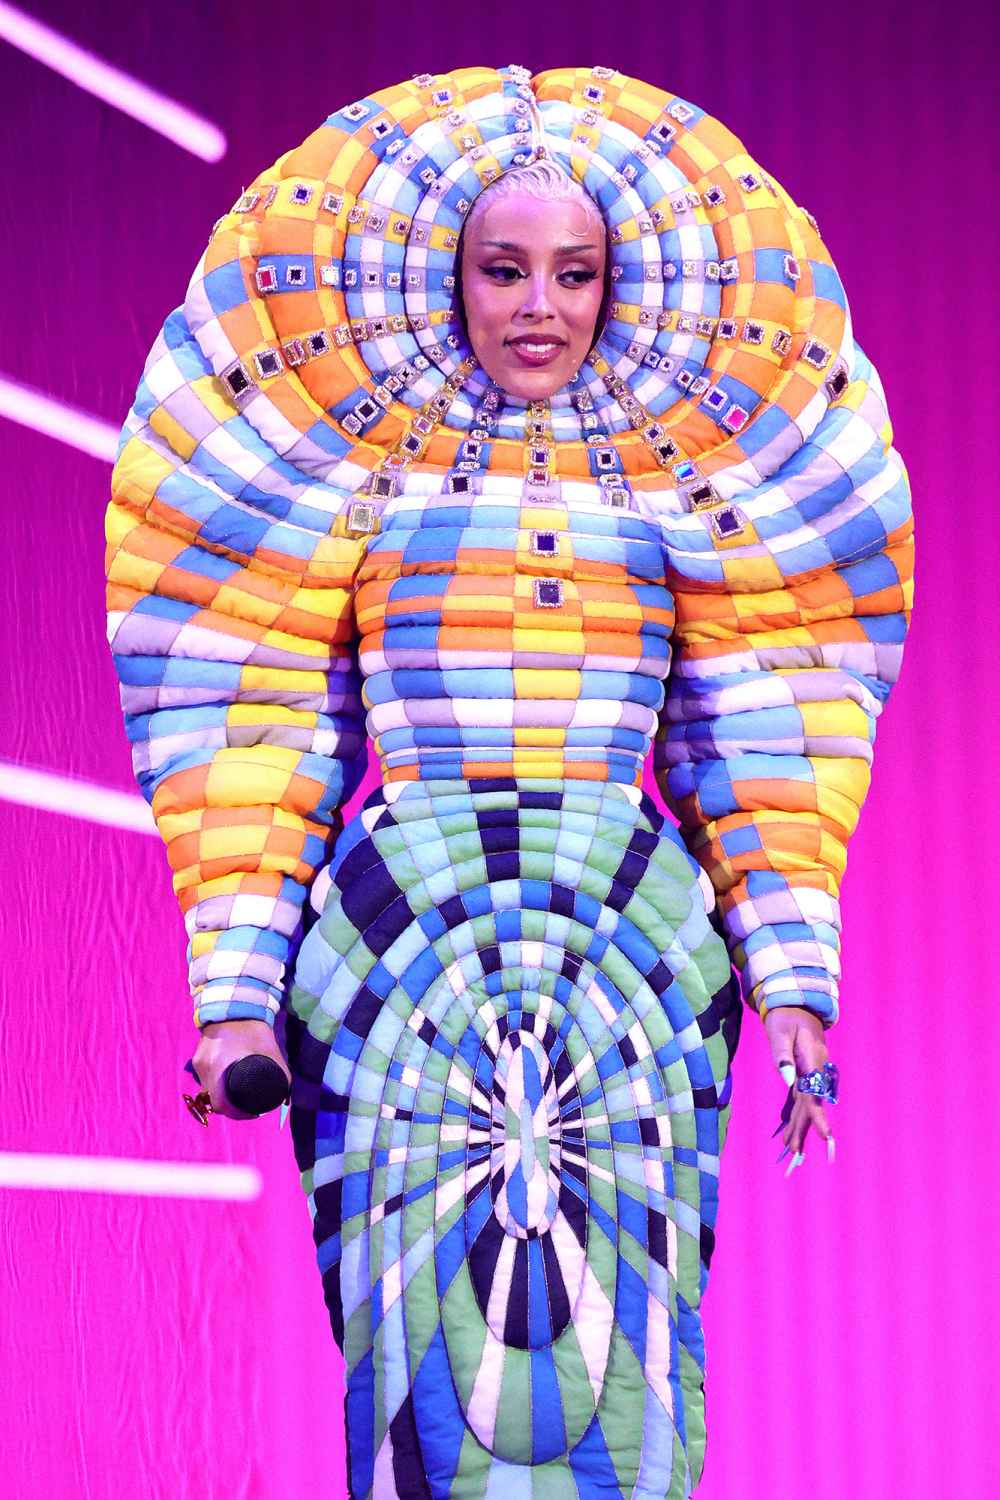 VMAs 2021: See Doja Cat's Wildest Awards Show Outfits